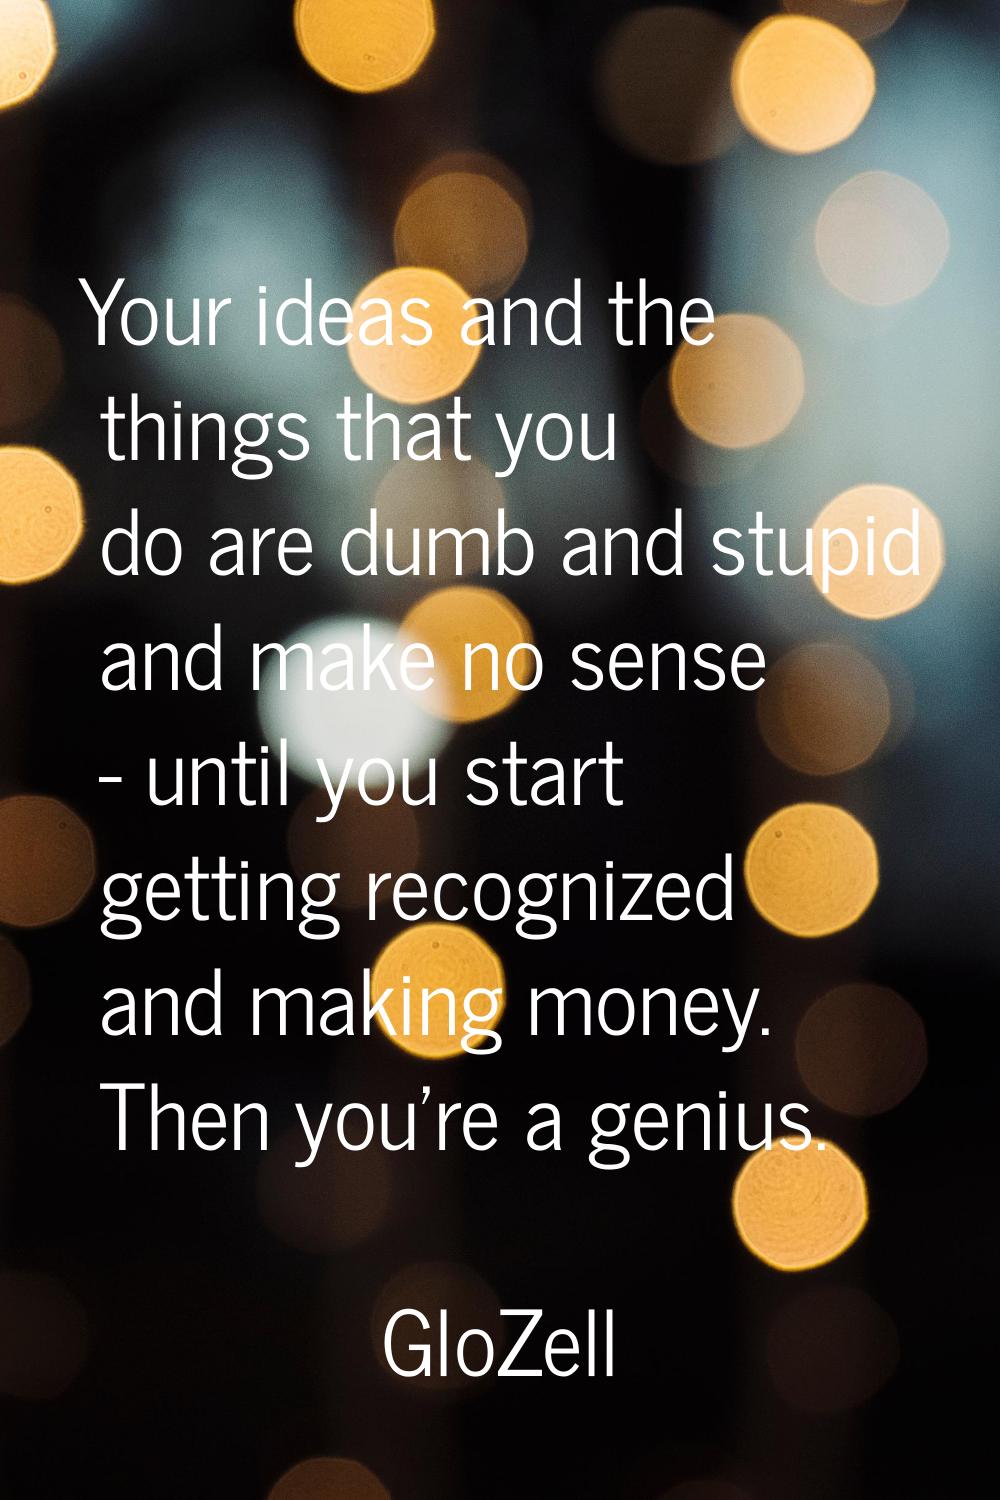 Your ideas and the things that you do are dumb and stupid and make no sense - until you start getti